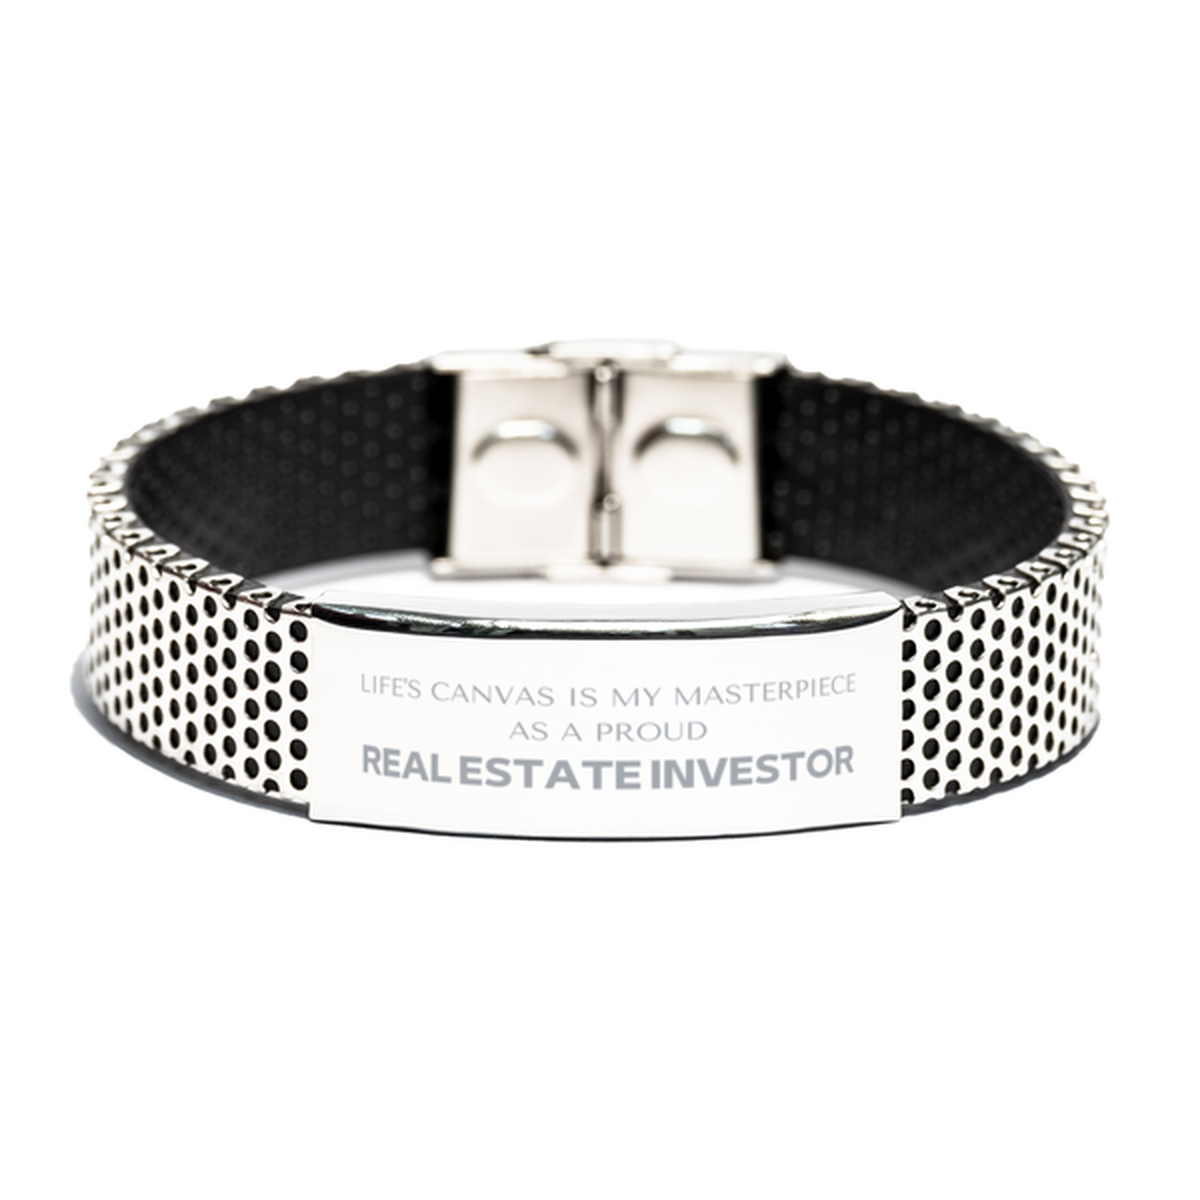 Proud Real Estate Investor Gifts, Life's canvas is my masterpiece, Epic Birthday Christmas Unique Stainless Steel Bracelet For Real Estate Investor, Coworkers, Men, Women, Friends